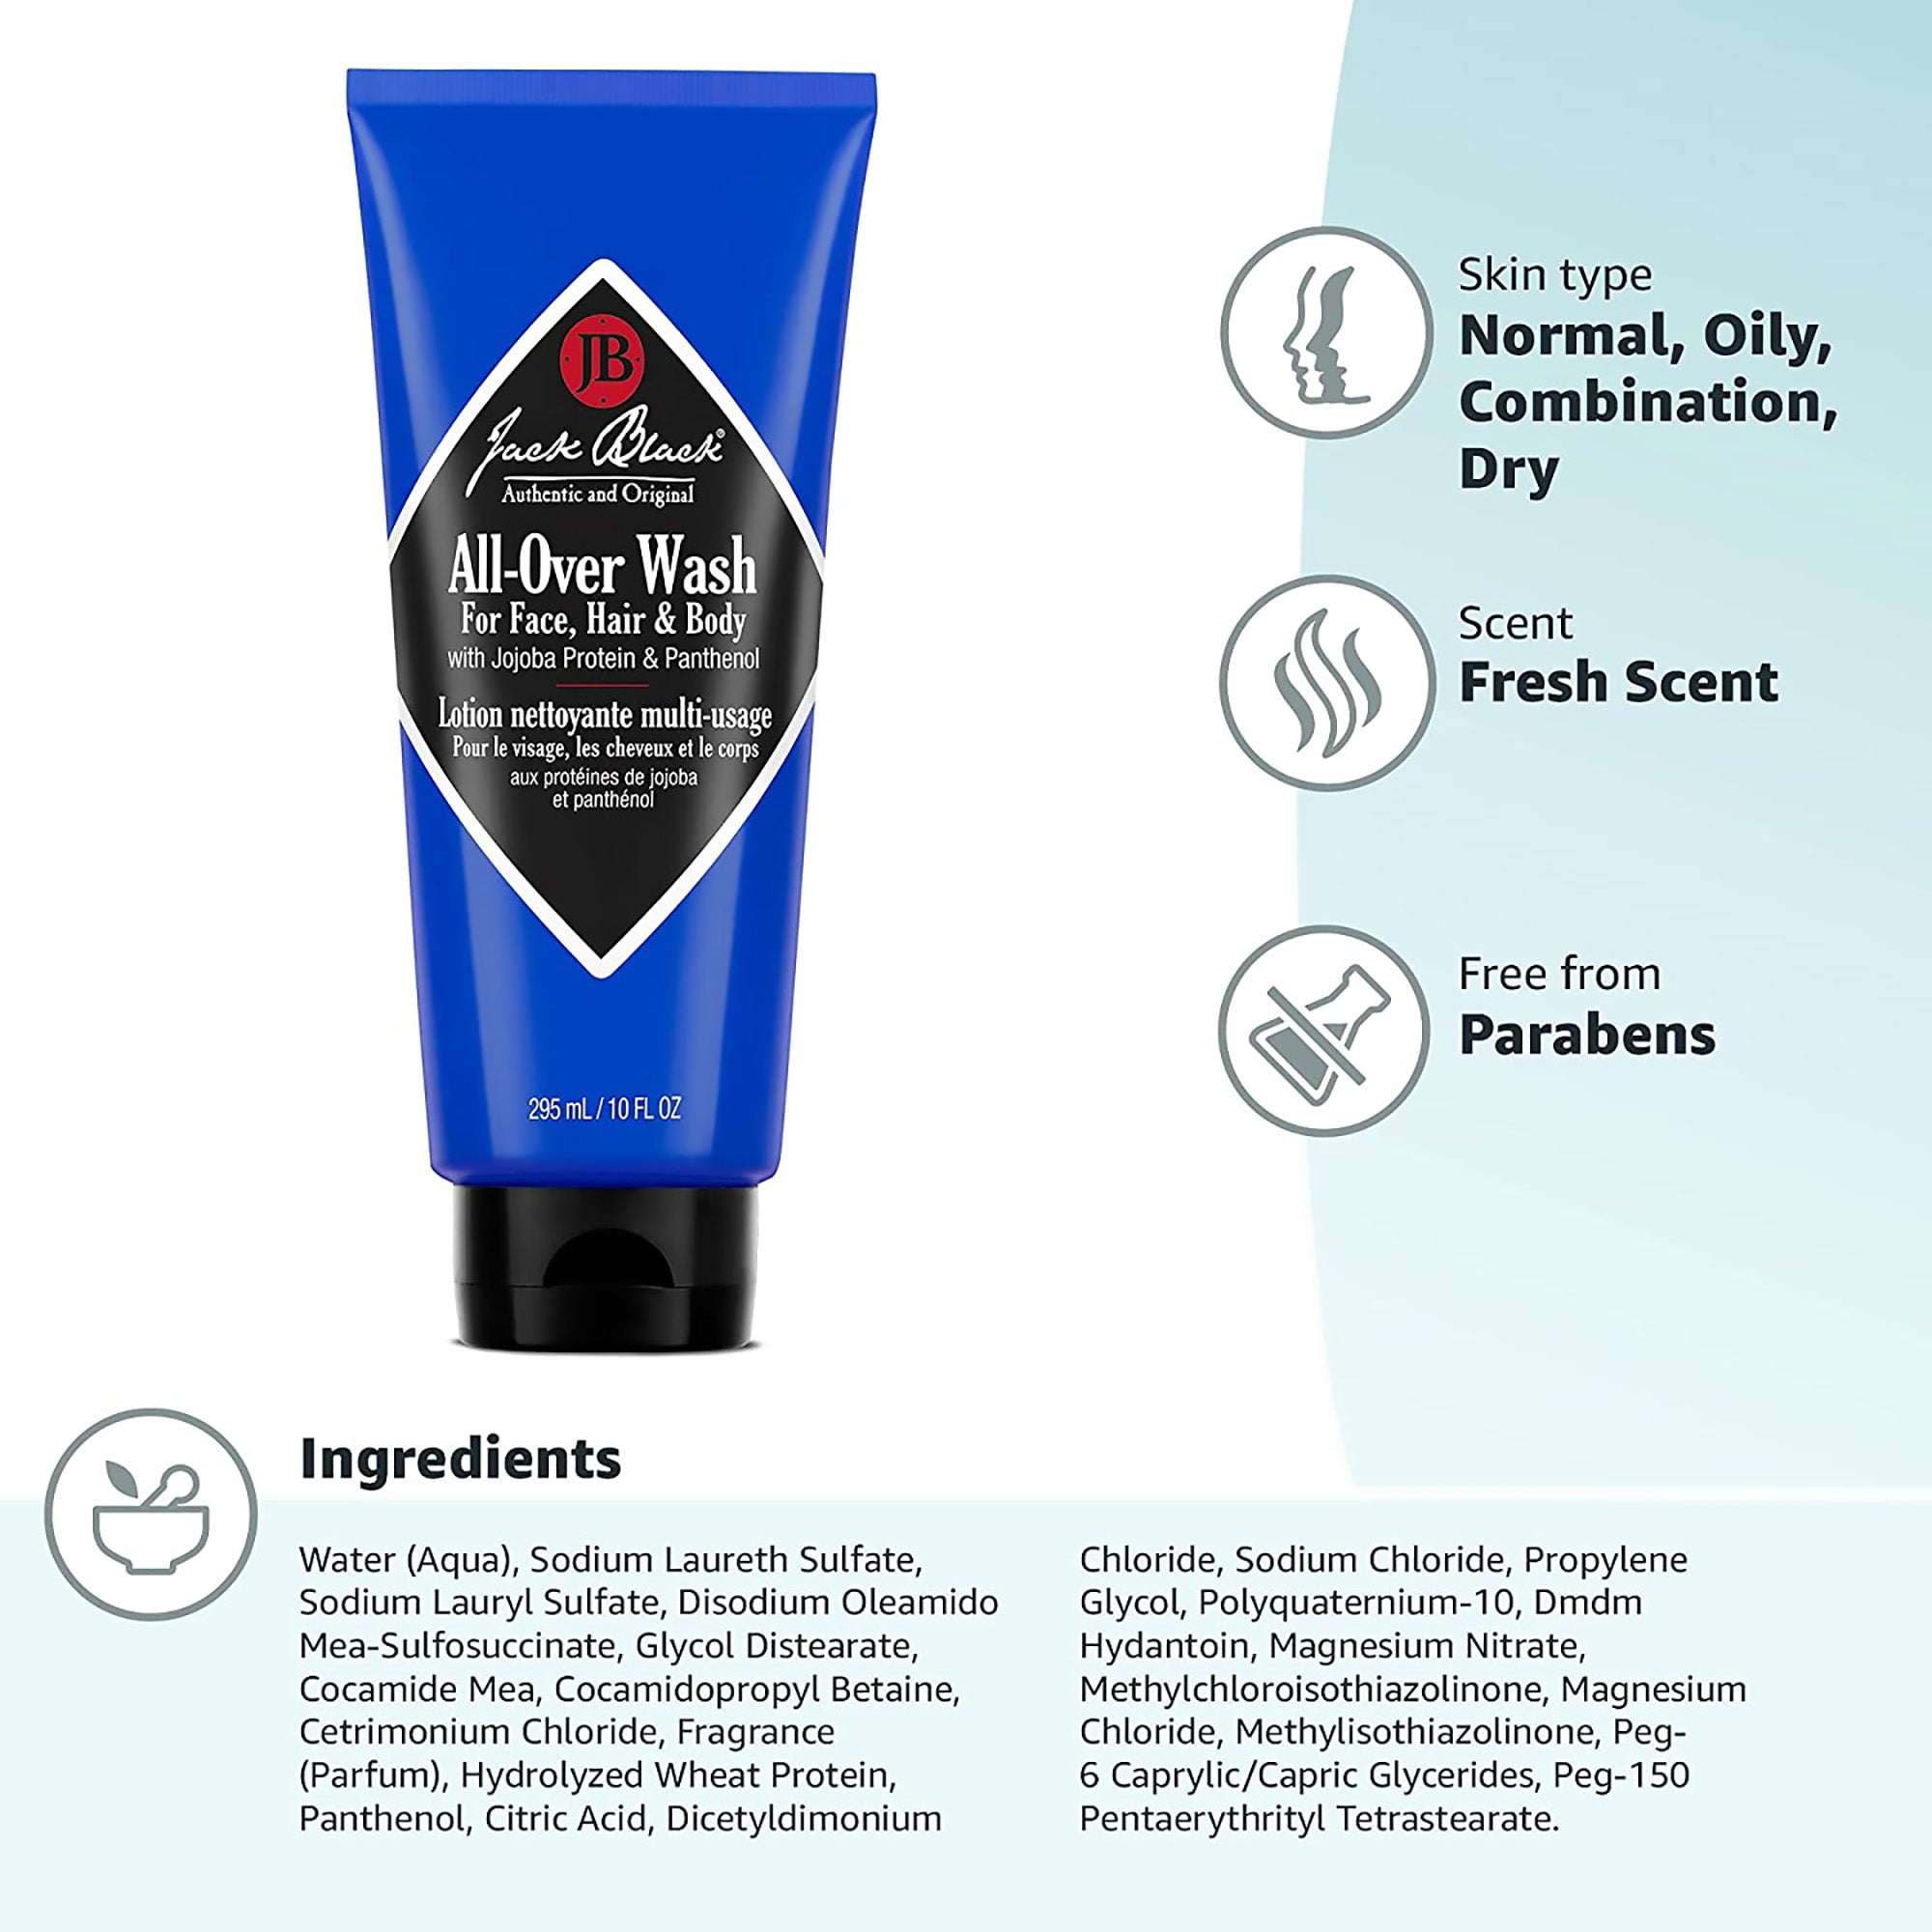 Jack Black All-Over Wash for Face, Hair & Body / 10OZ